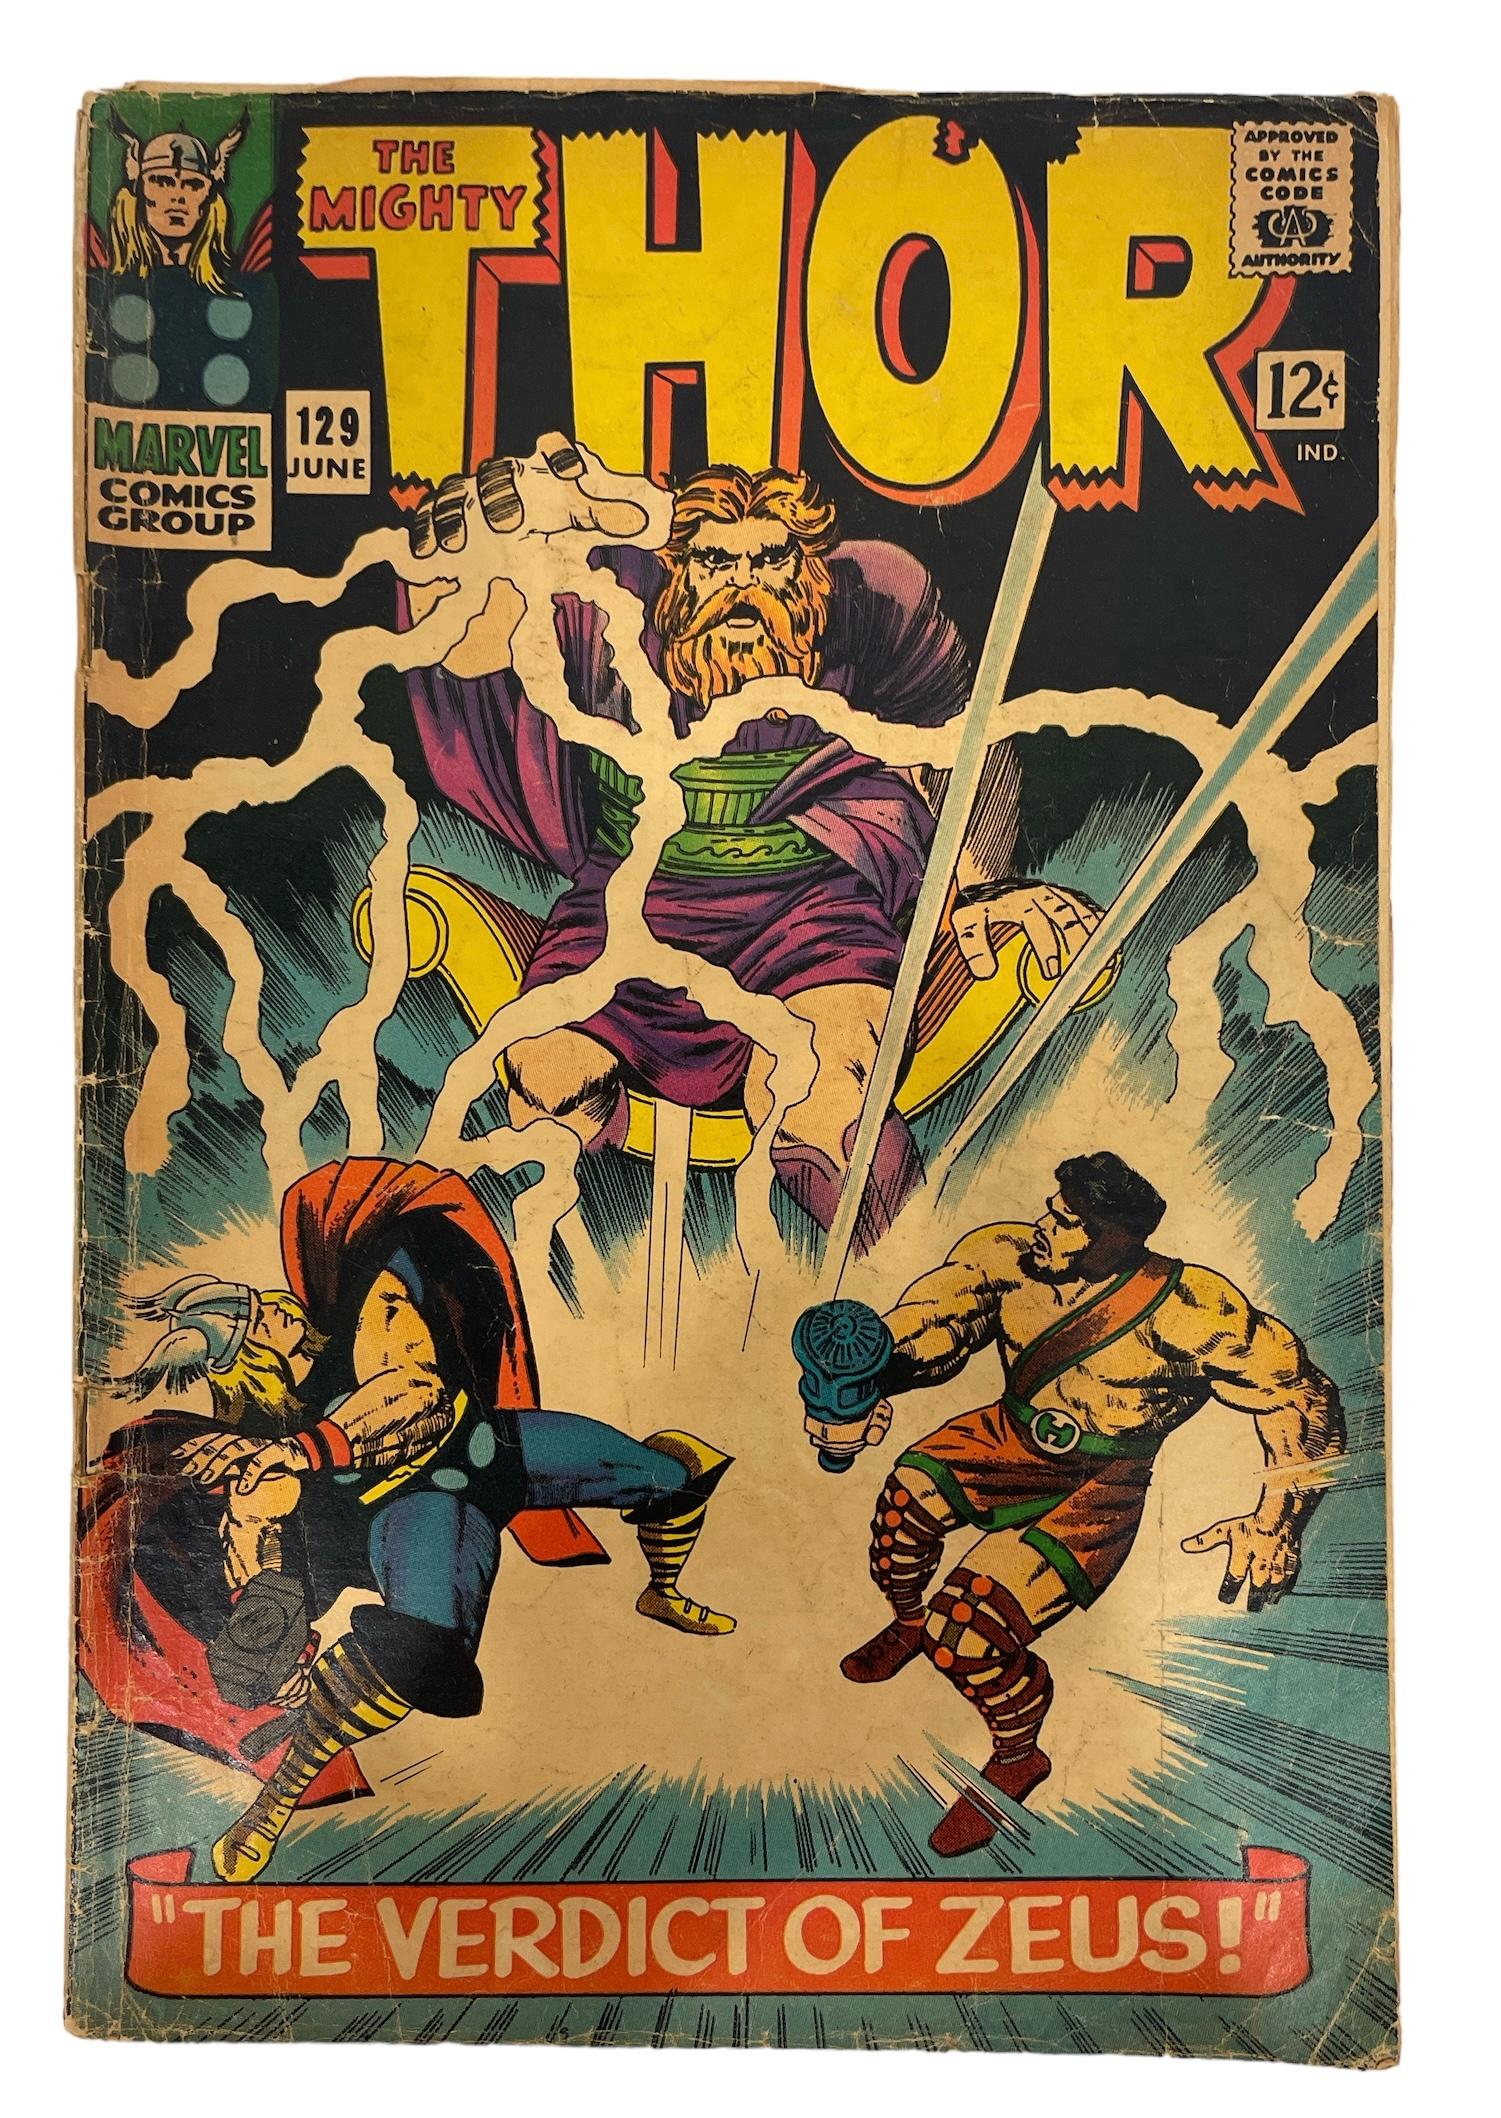 Vintage Marvel Comics - The Mighty Thor No.152 and No.129